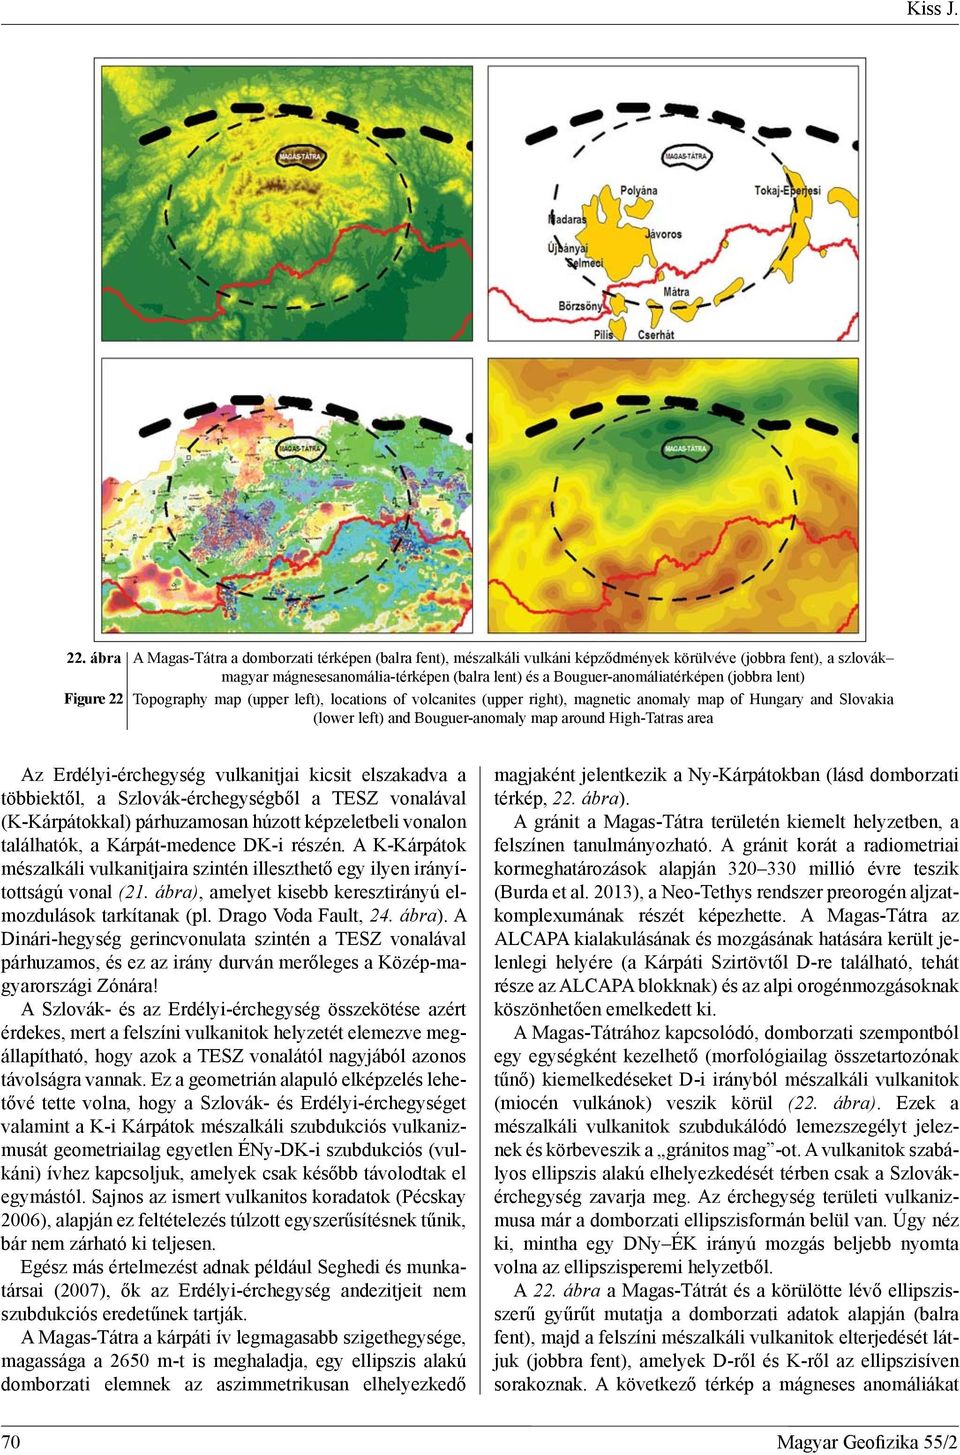 (jobbra lent) Figure 22 Topography map (upper left), locations of volcanites (upper right), magnetic anomaly map of Hungary and Slovakia (lower left) and Bouguer-anomaly map around High-Tatras area